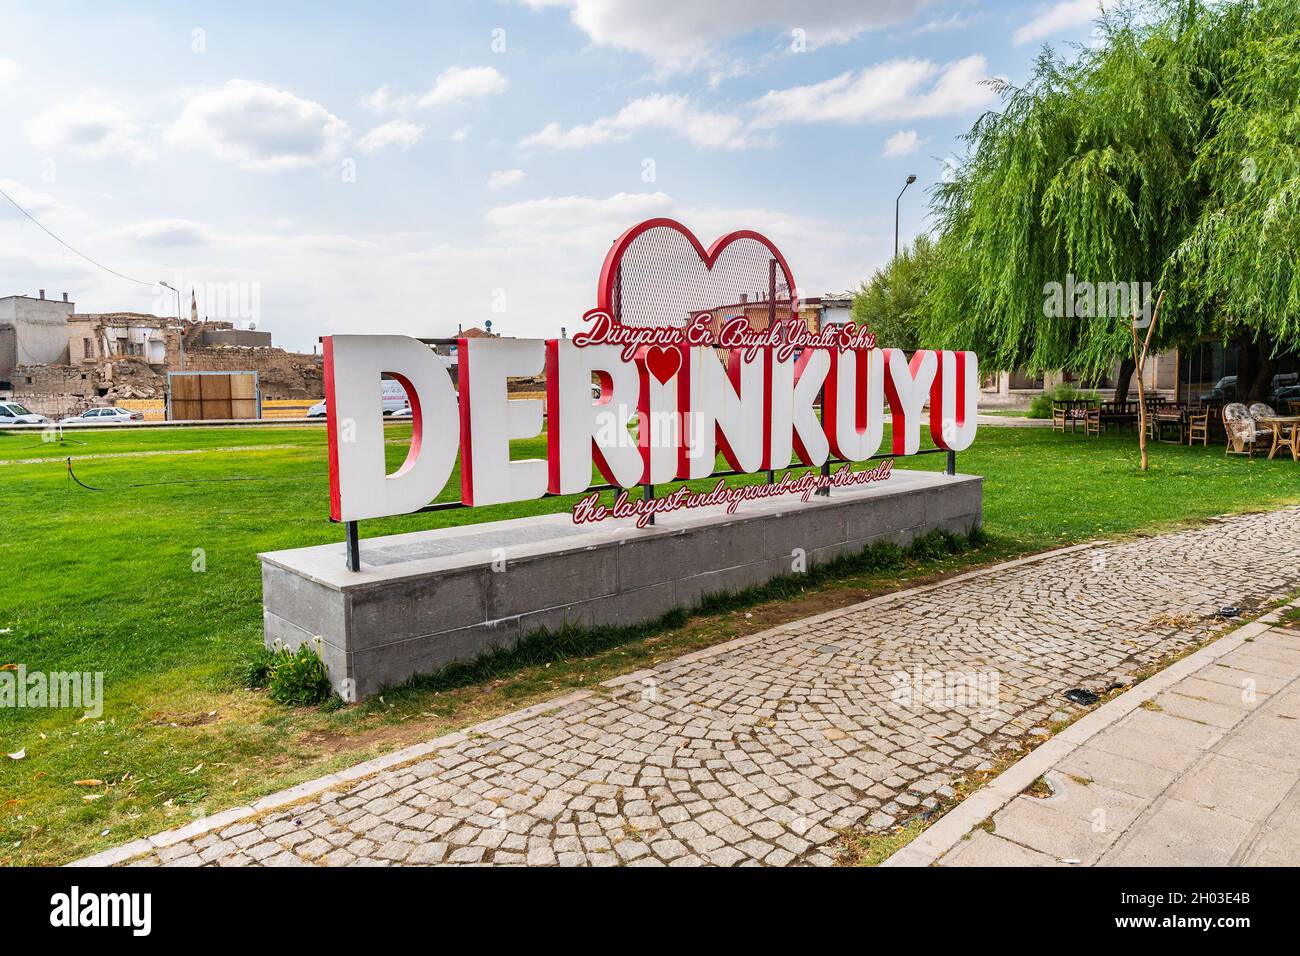 Derinkuyu Underground City Breathtaking Picturesque View of Welcome Billboard on a Blue Sky Day in Summer Stock Photo